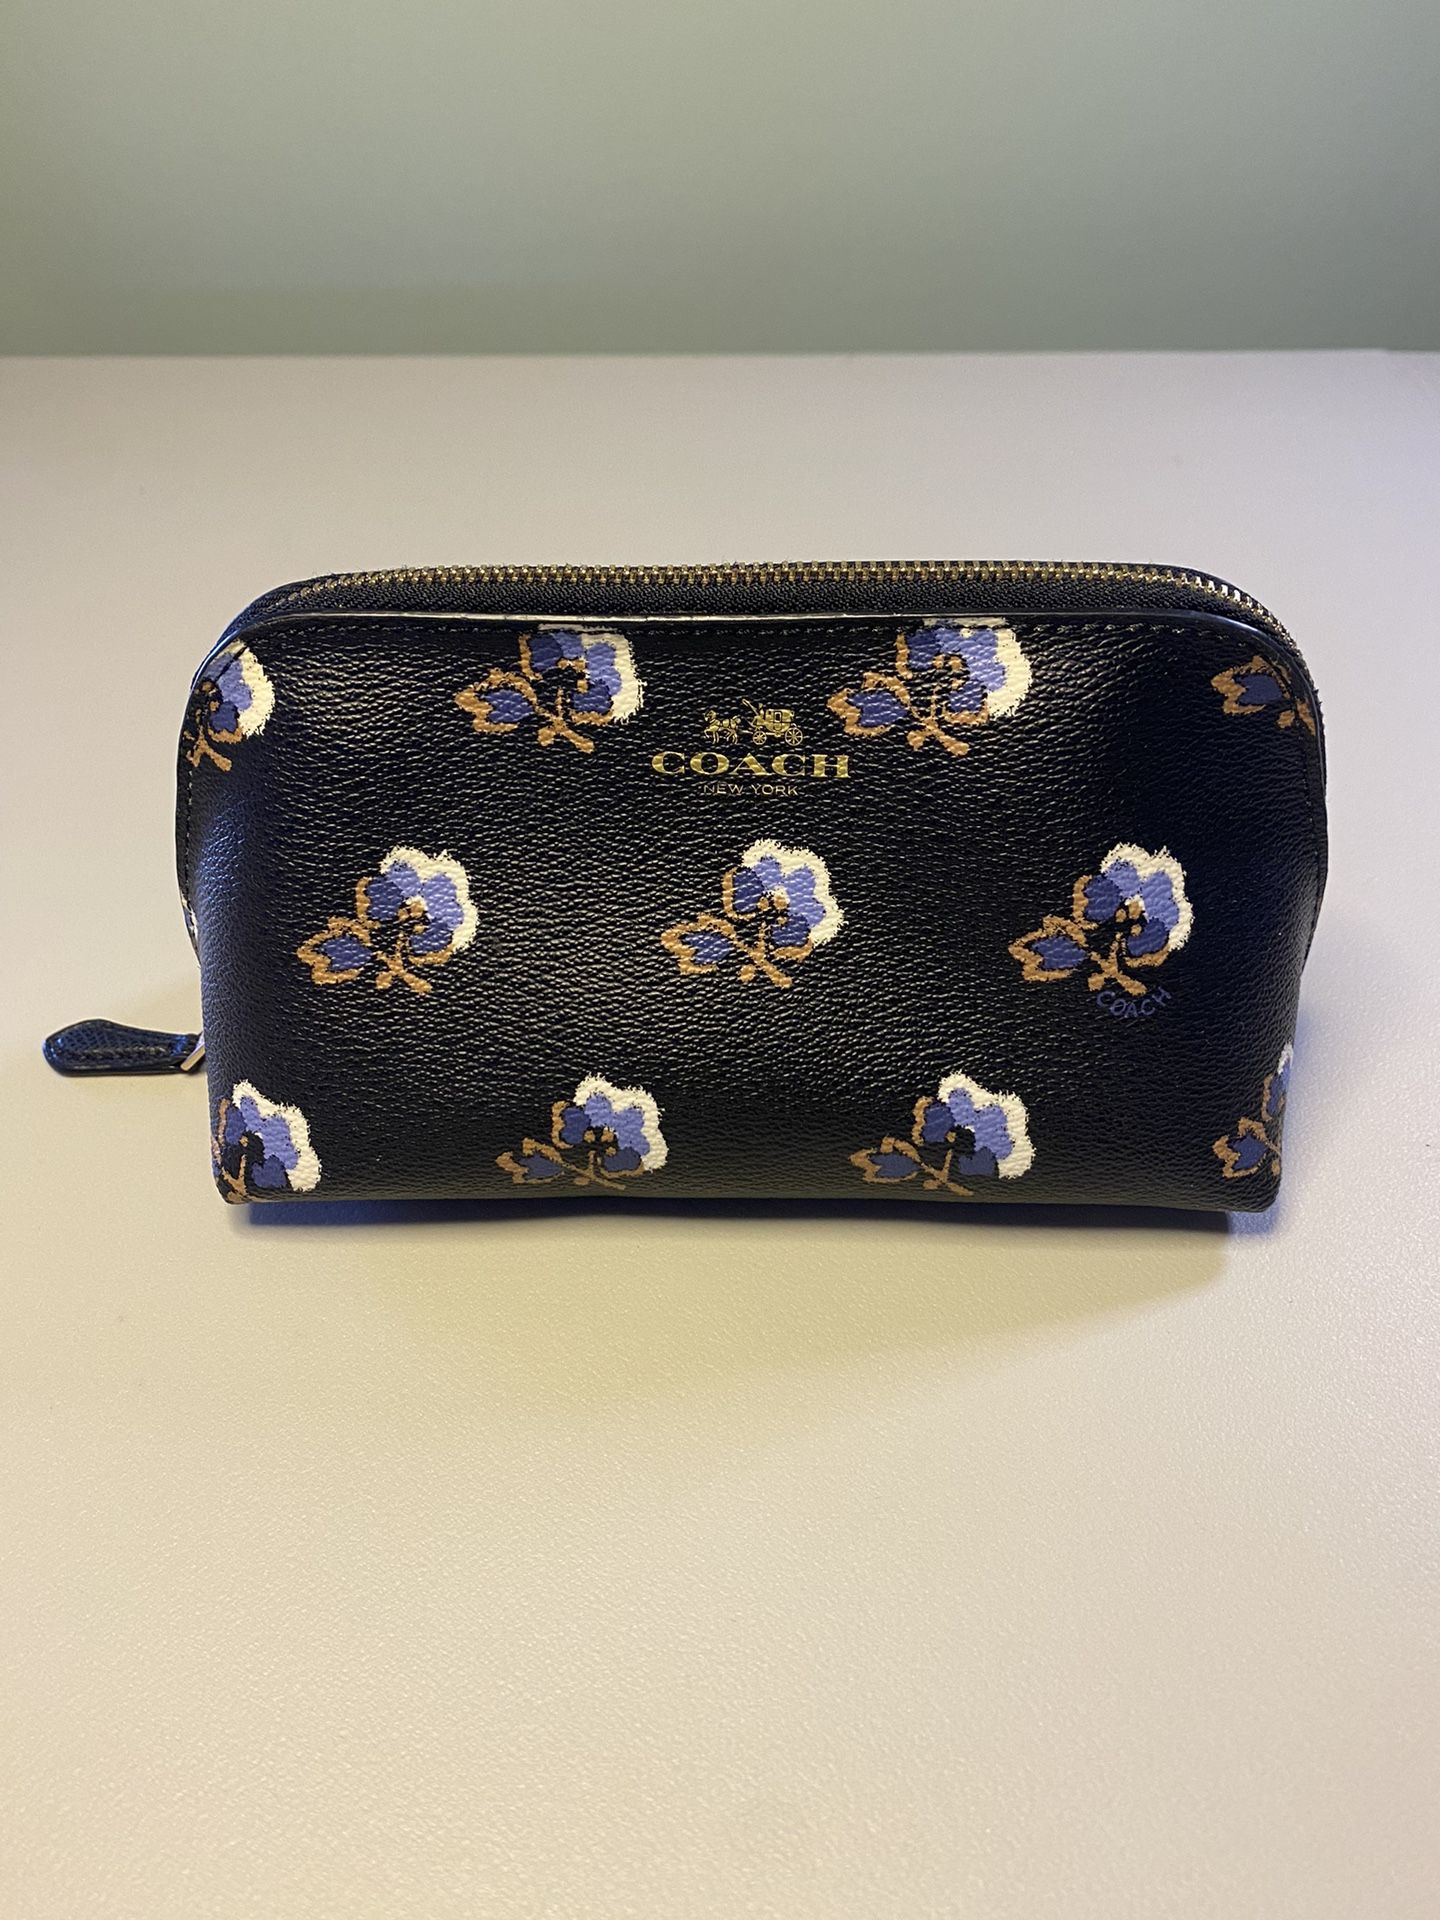 Coach Flower Print with Horse & Carriage Pouch